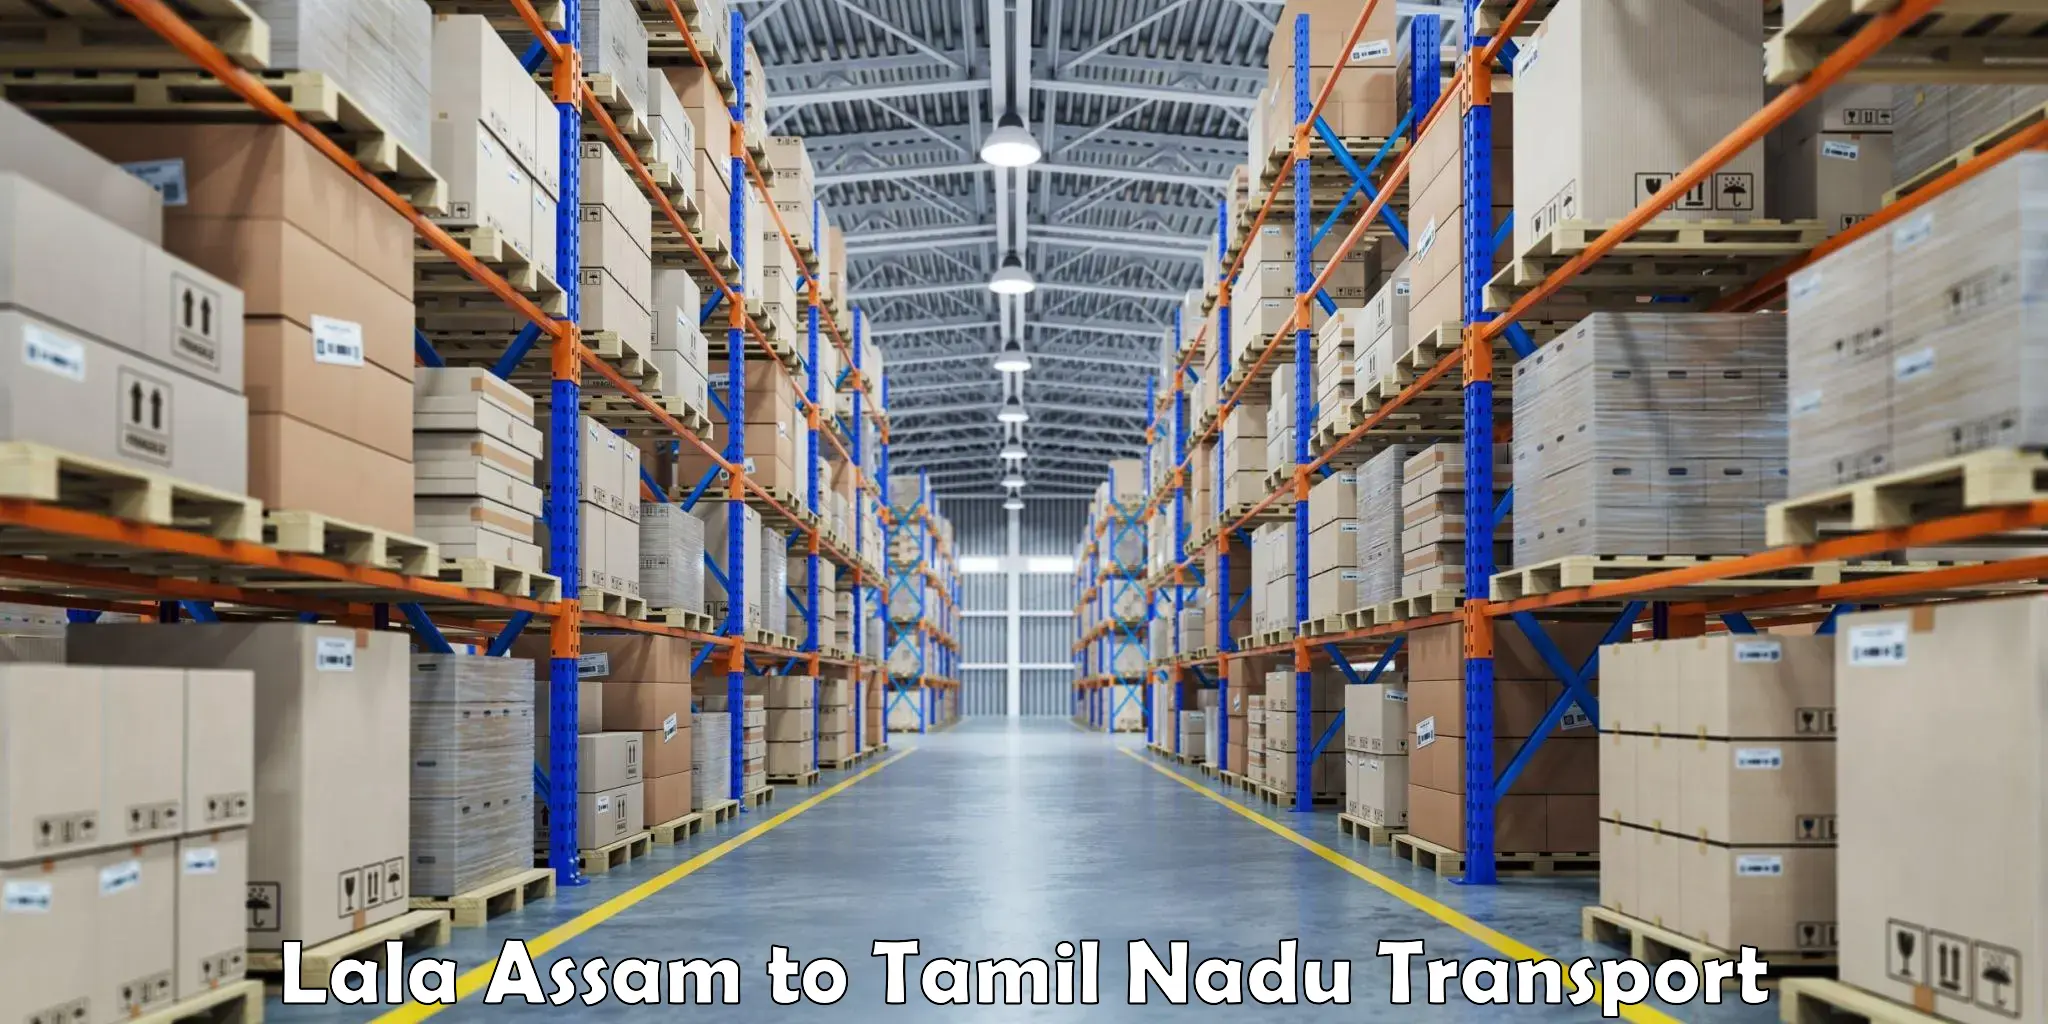 Delivery service Lala Assam to Chennai Port